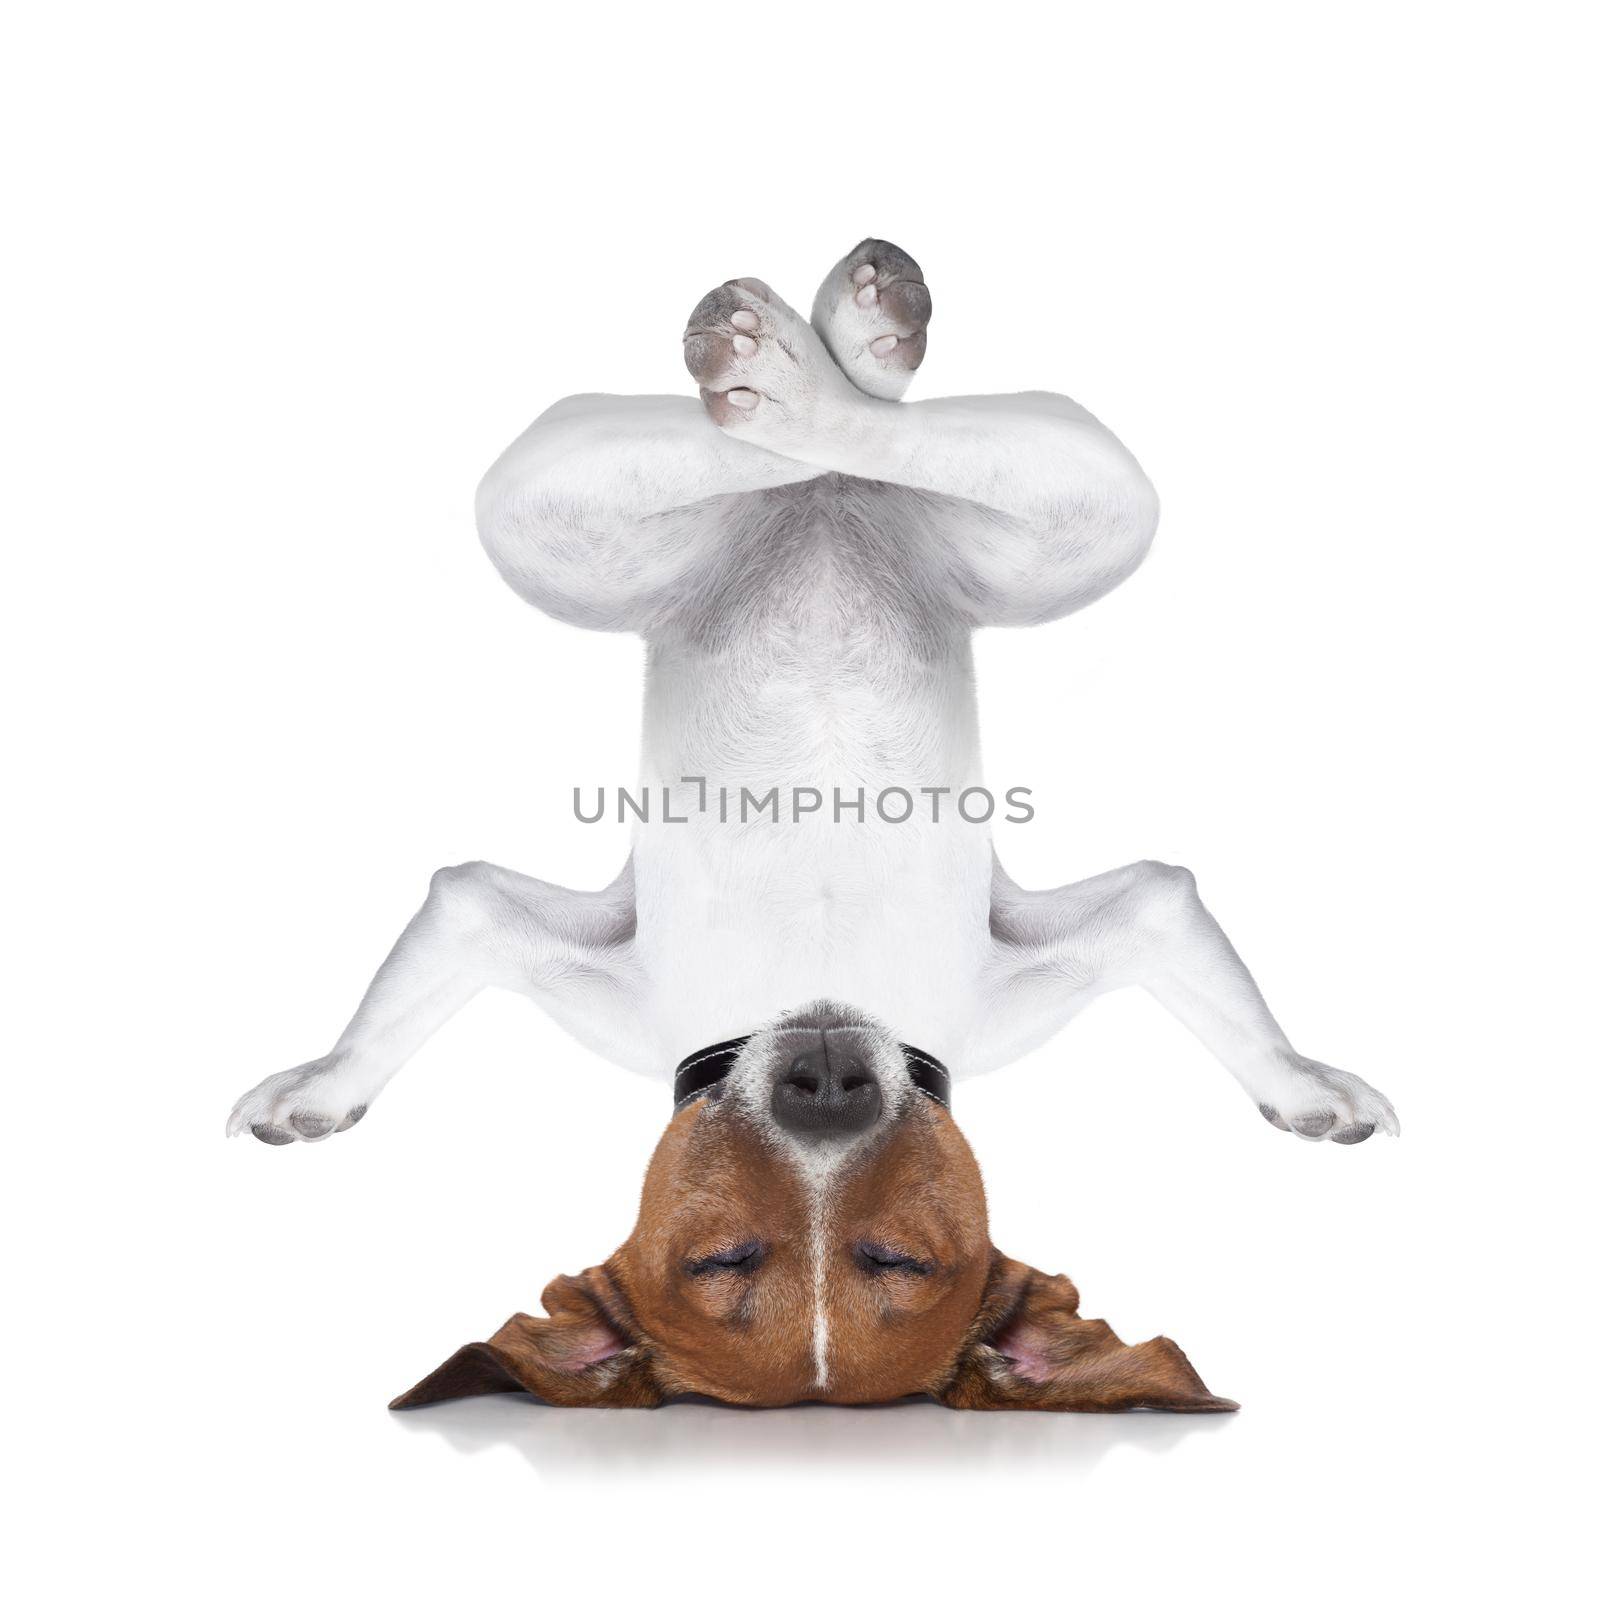 dog upside down relaxing with closed eyes doing yoga and balancing, isolated on white background